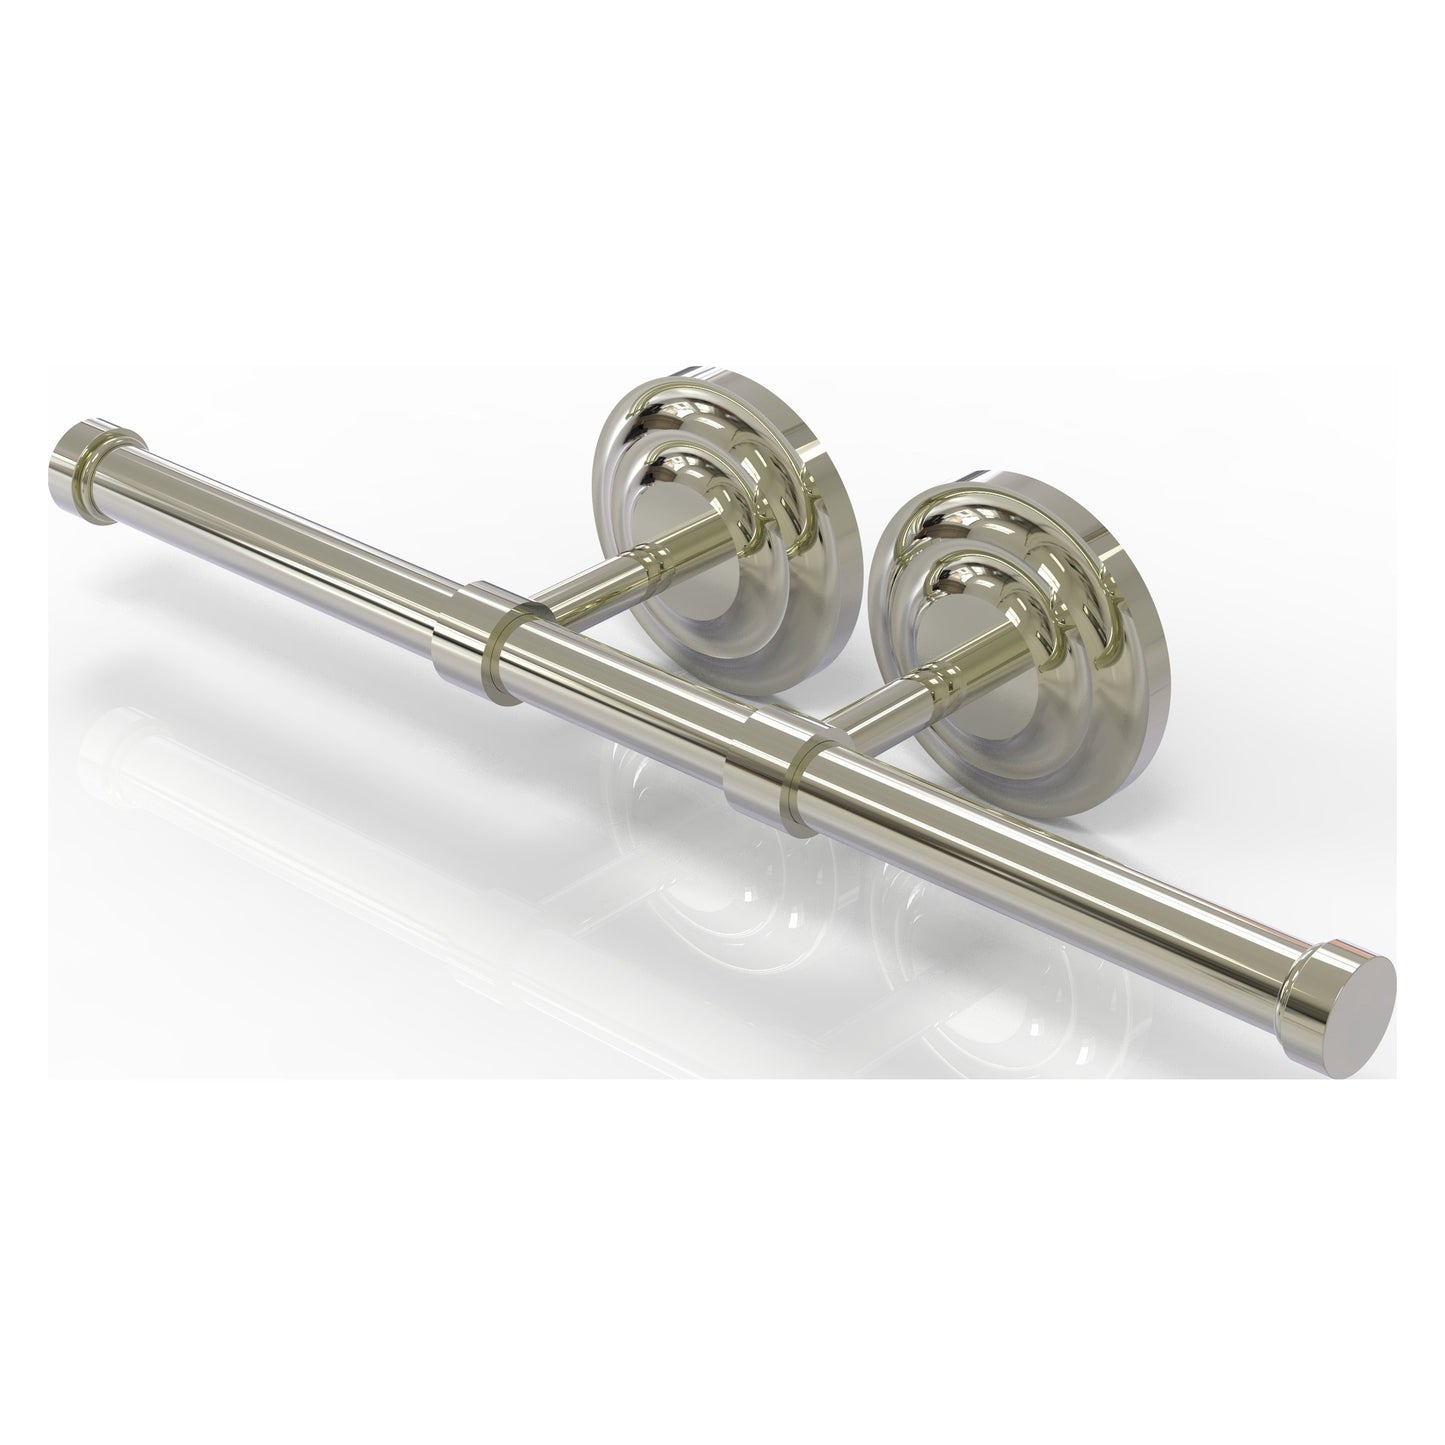 Allied Brass Que New 14.9" x 3.6" Polished Nickel Solid Brass Double Roll Toilet Tissue Holder